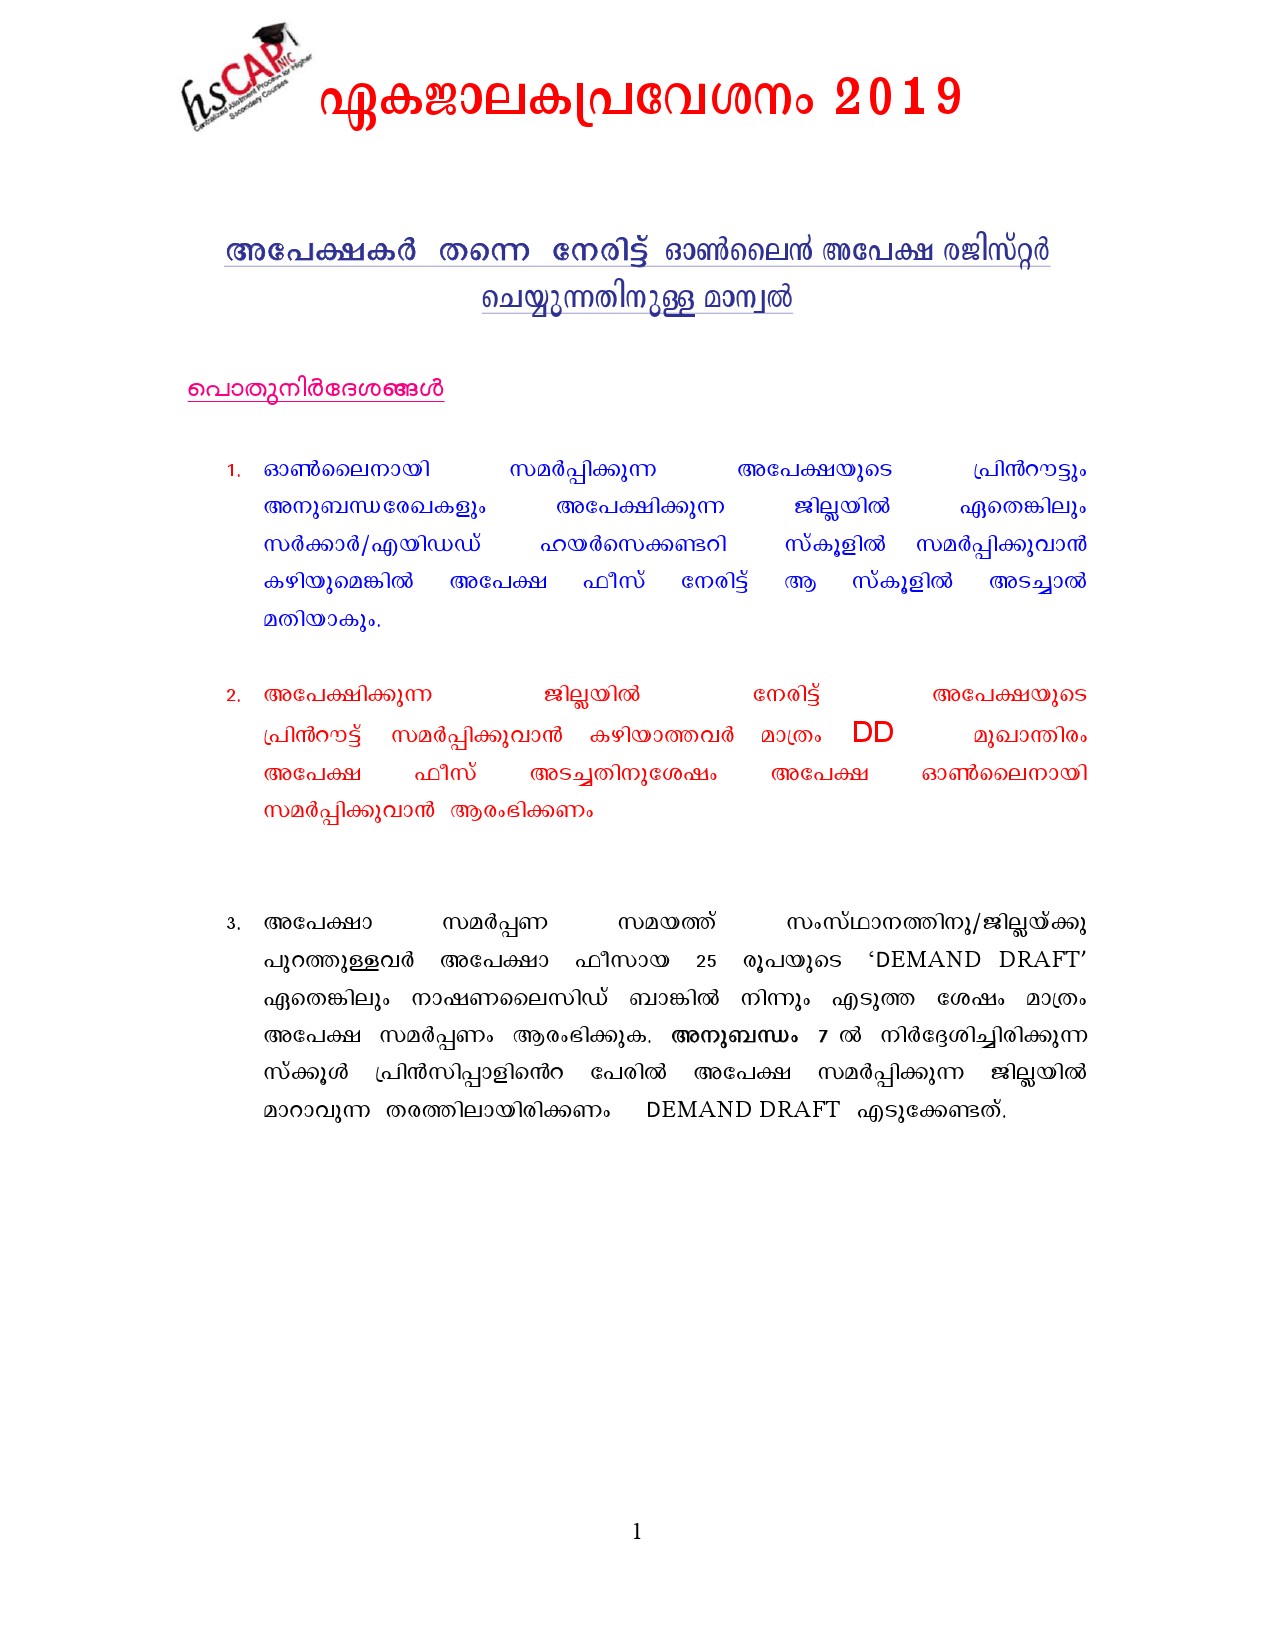 Higher Secondary School Online Application Manual in Malayalam - Notification Image 1